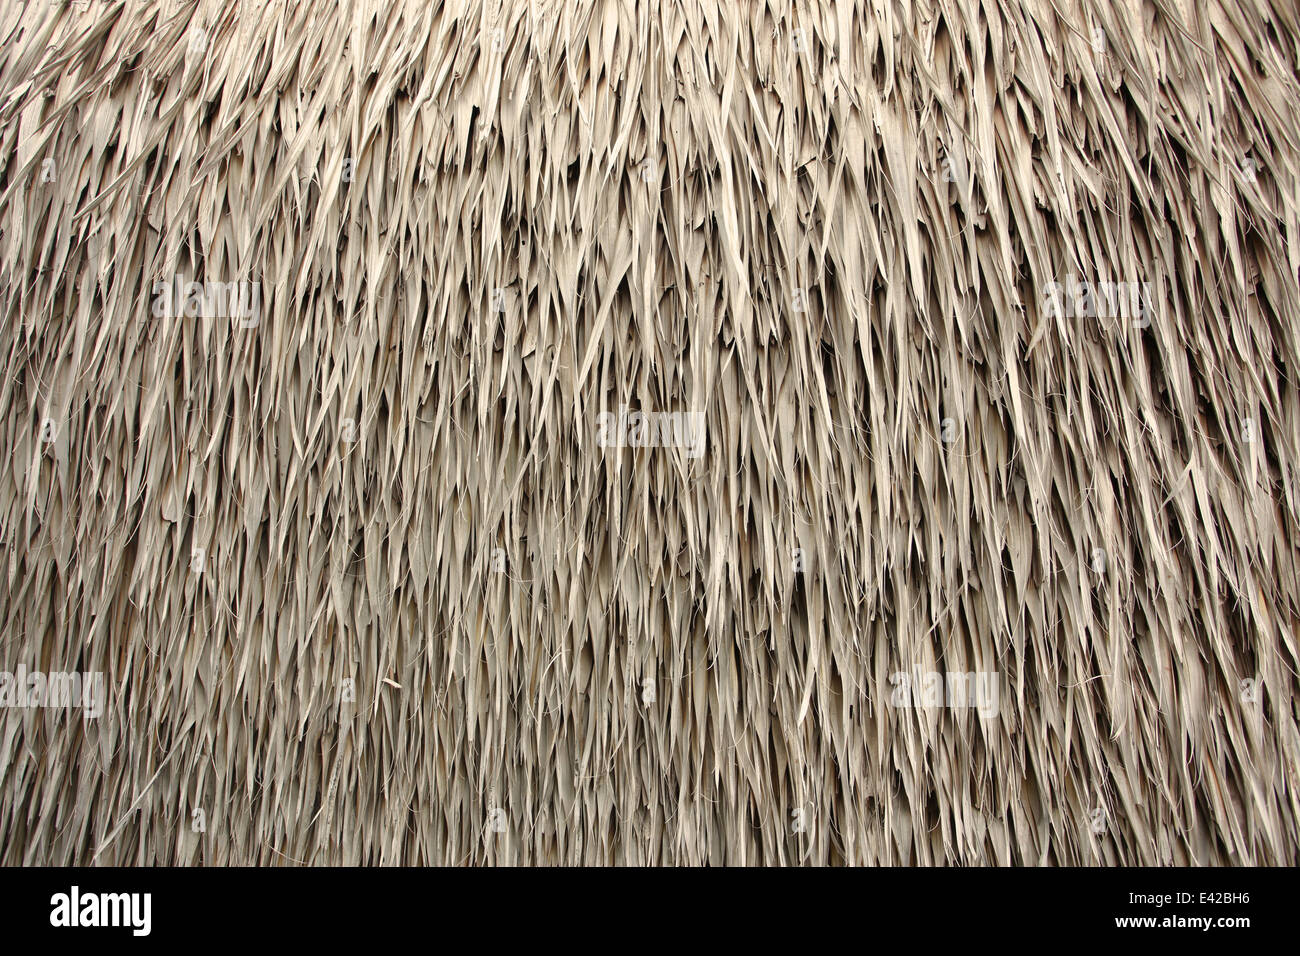 Thatched Roof Stock Photo